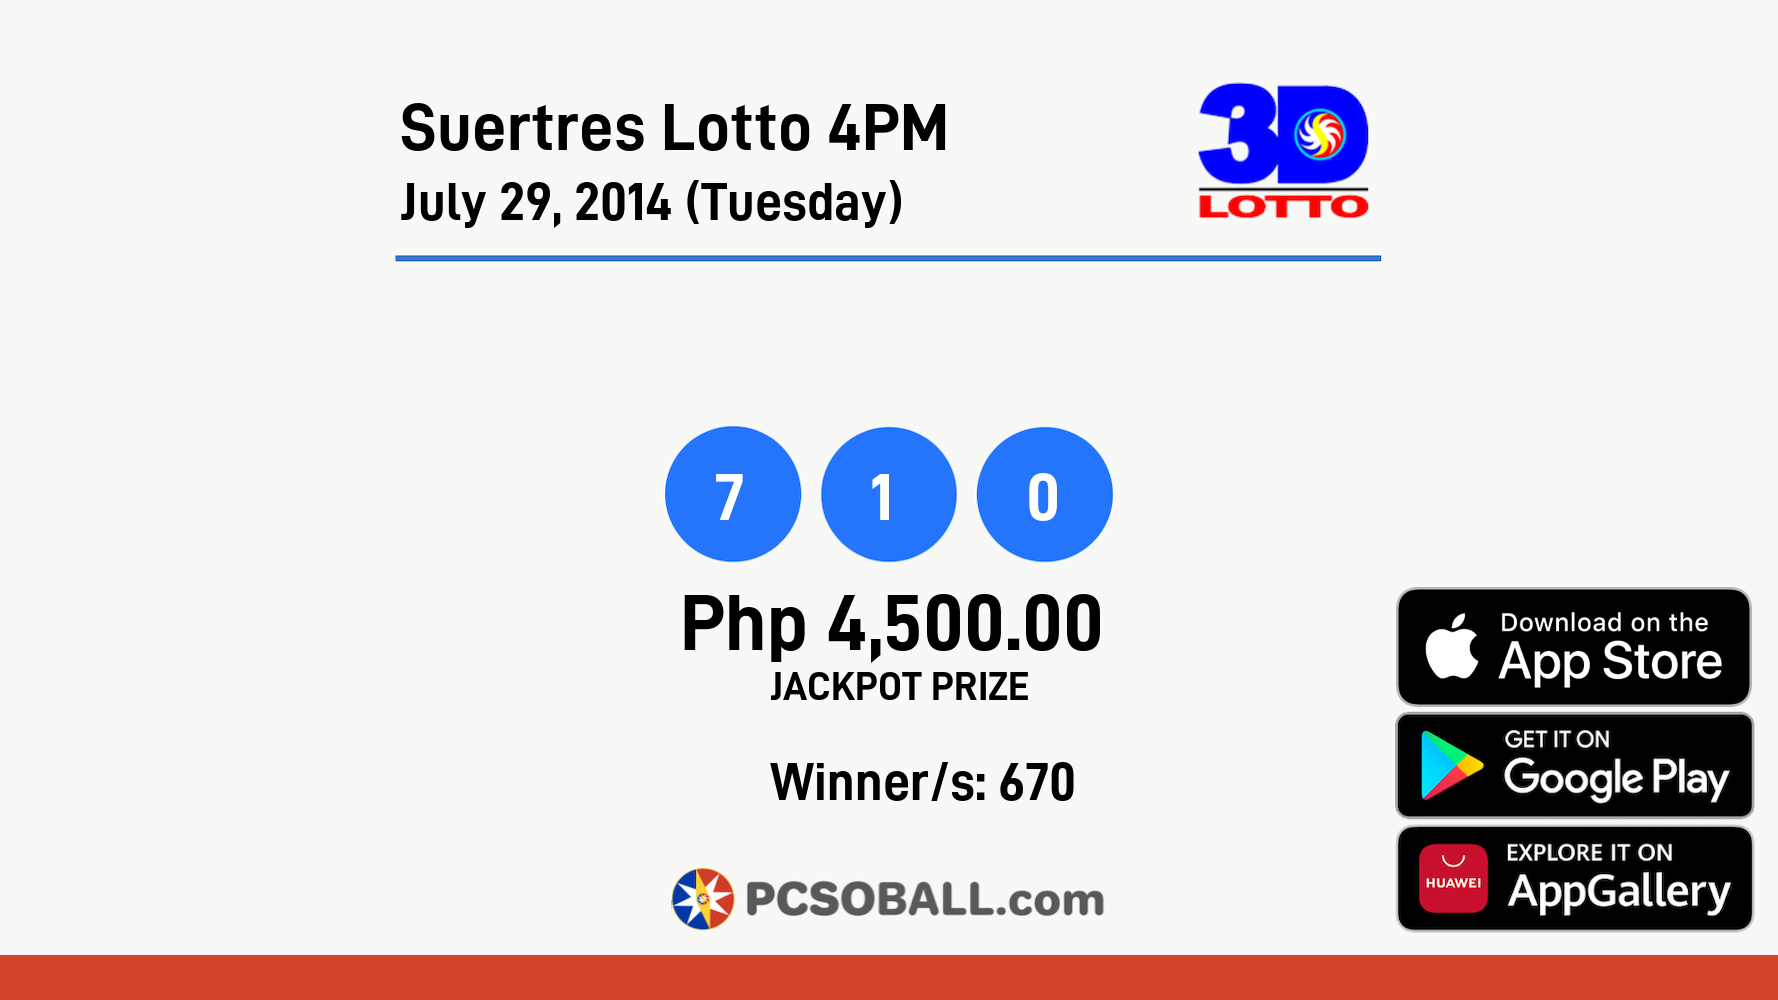 Suertres Lotto 4PM July 29, 2014 (Tuesday) Result